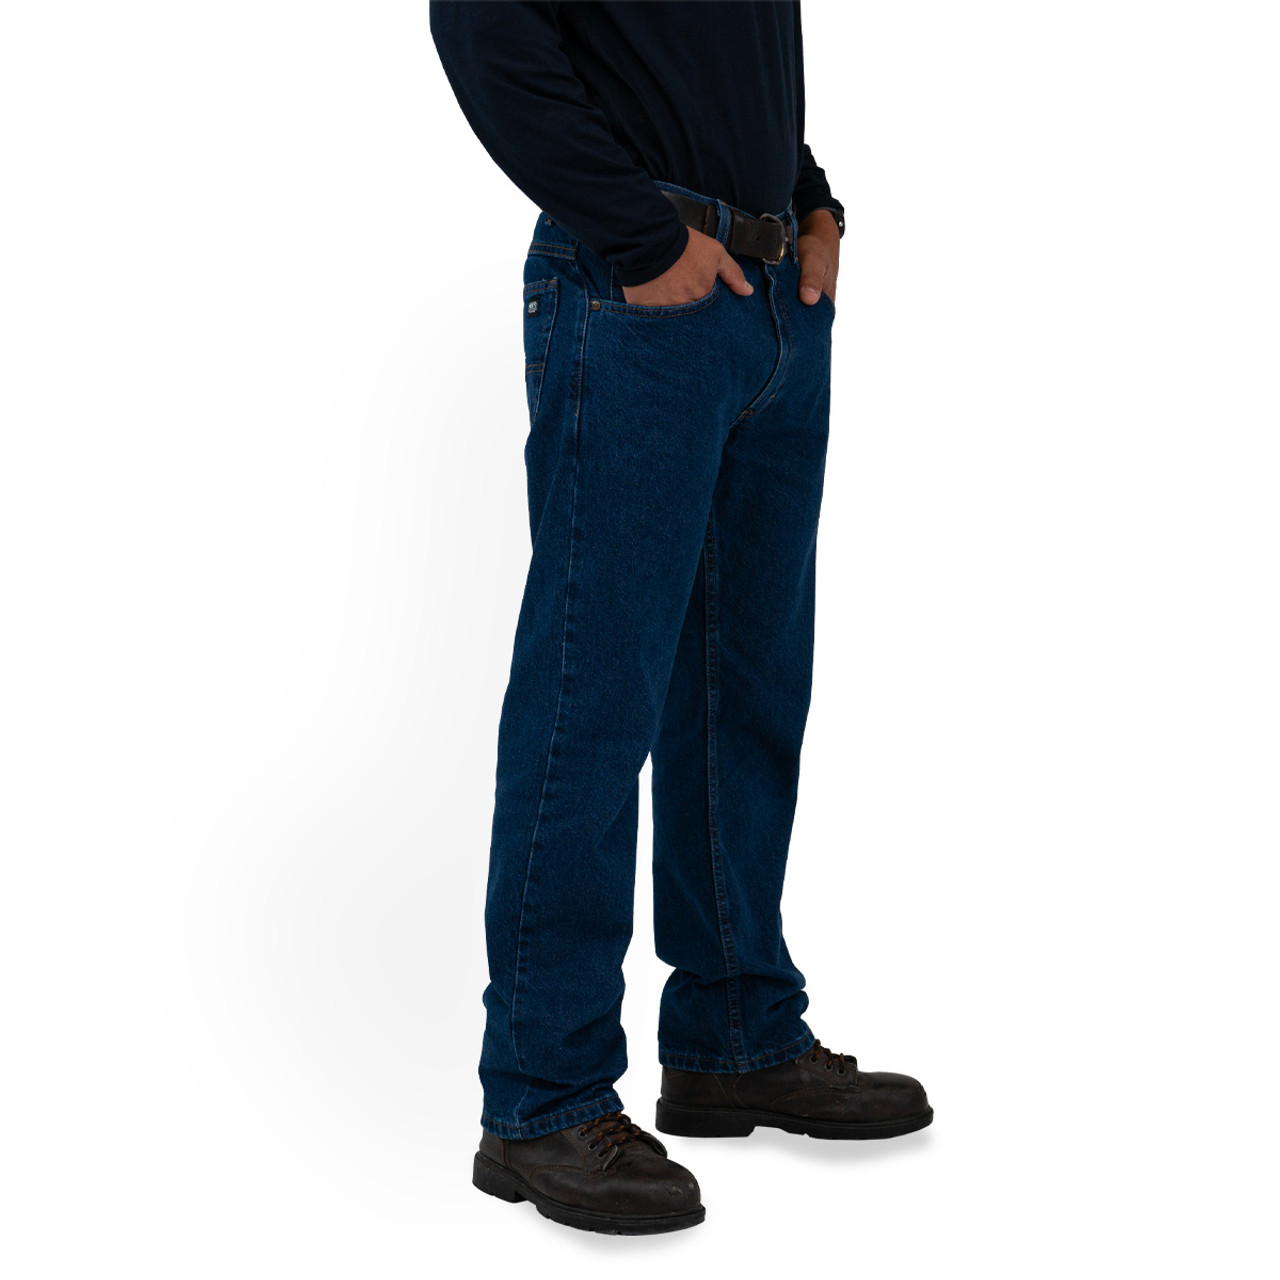 Jeans Men Fit Apparel KEY - Relaxed for